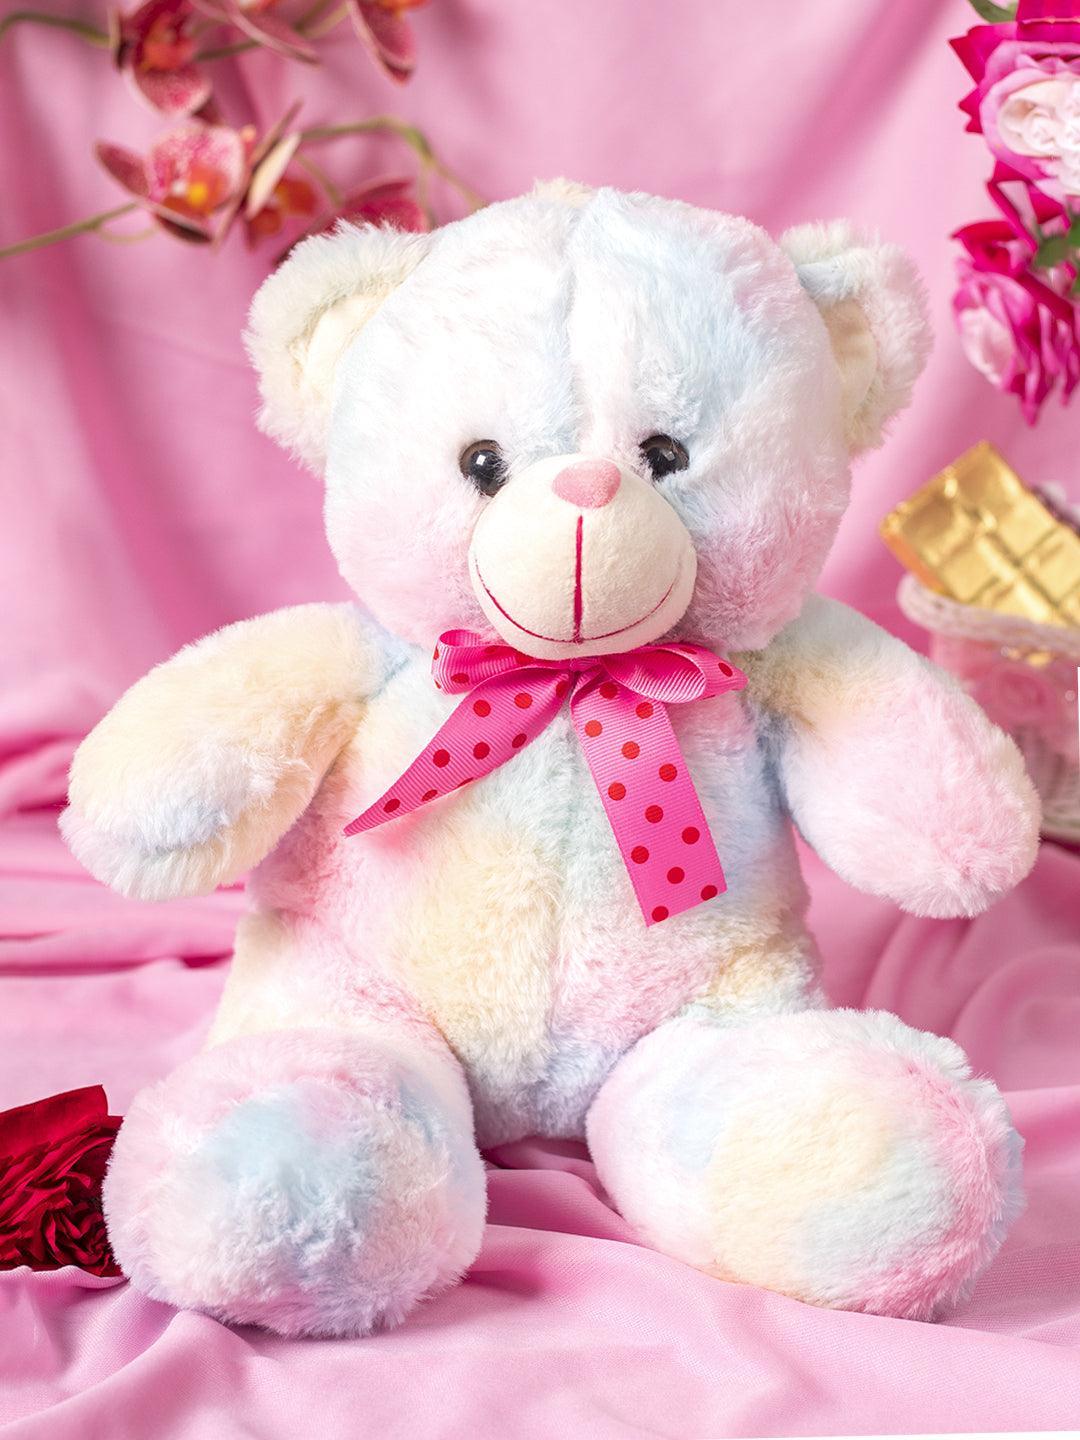 Buy Rainbow Teddy Bear Valentine Gift at the best price on Tuesday